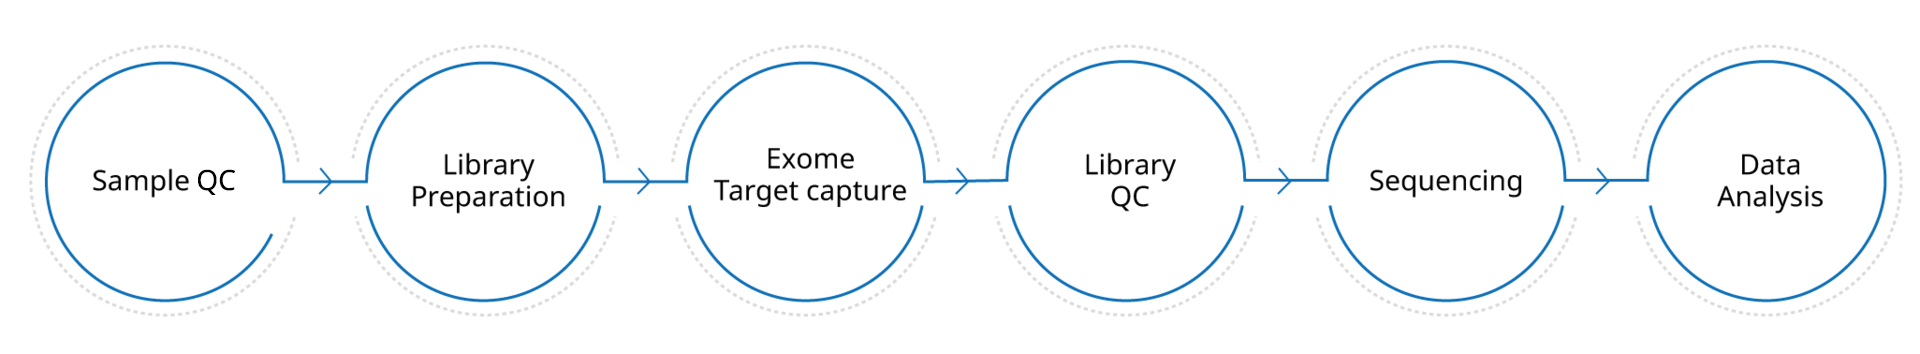 Sample QC, Library Preparation, Exome Target capture, Library QC, Sequencing, Data Analysis